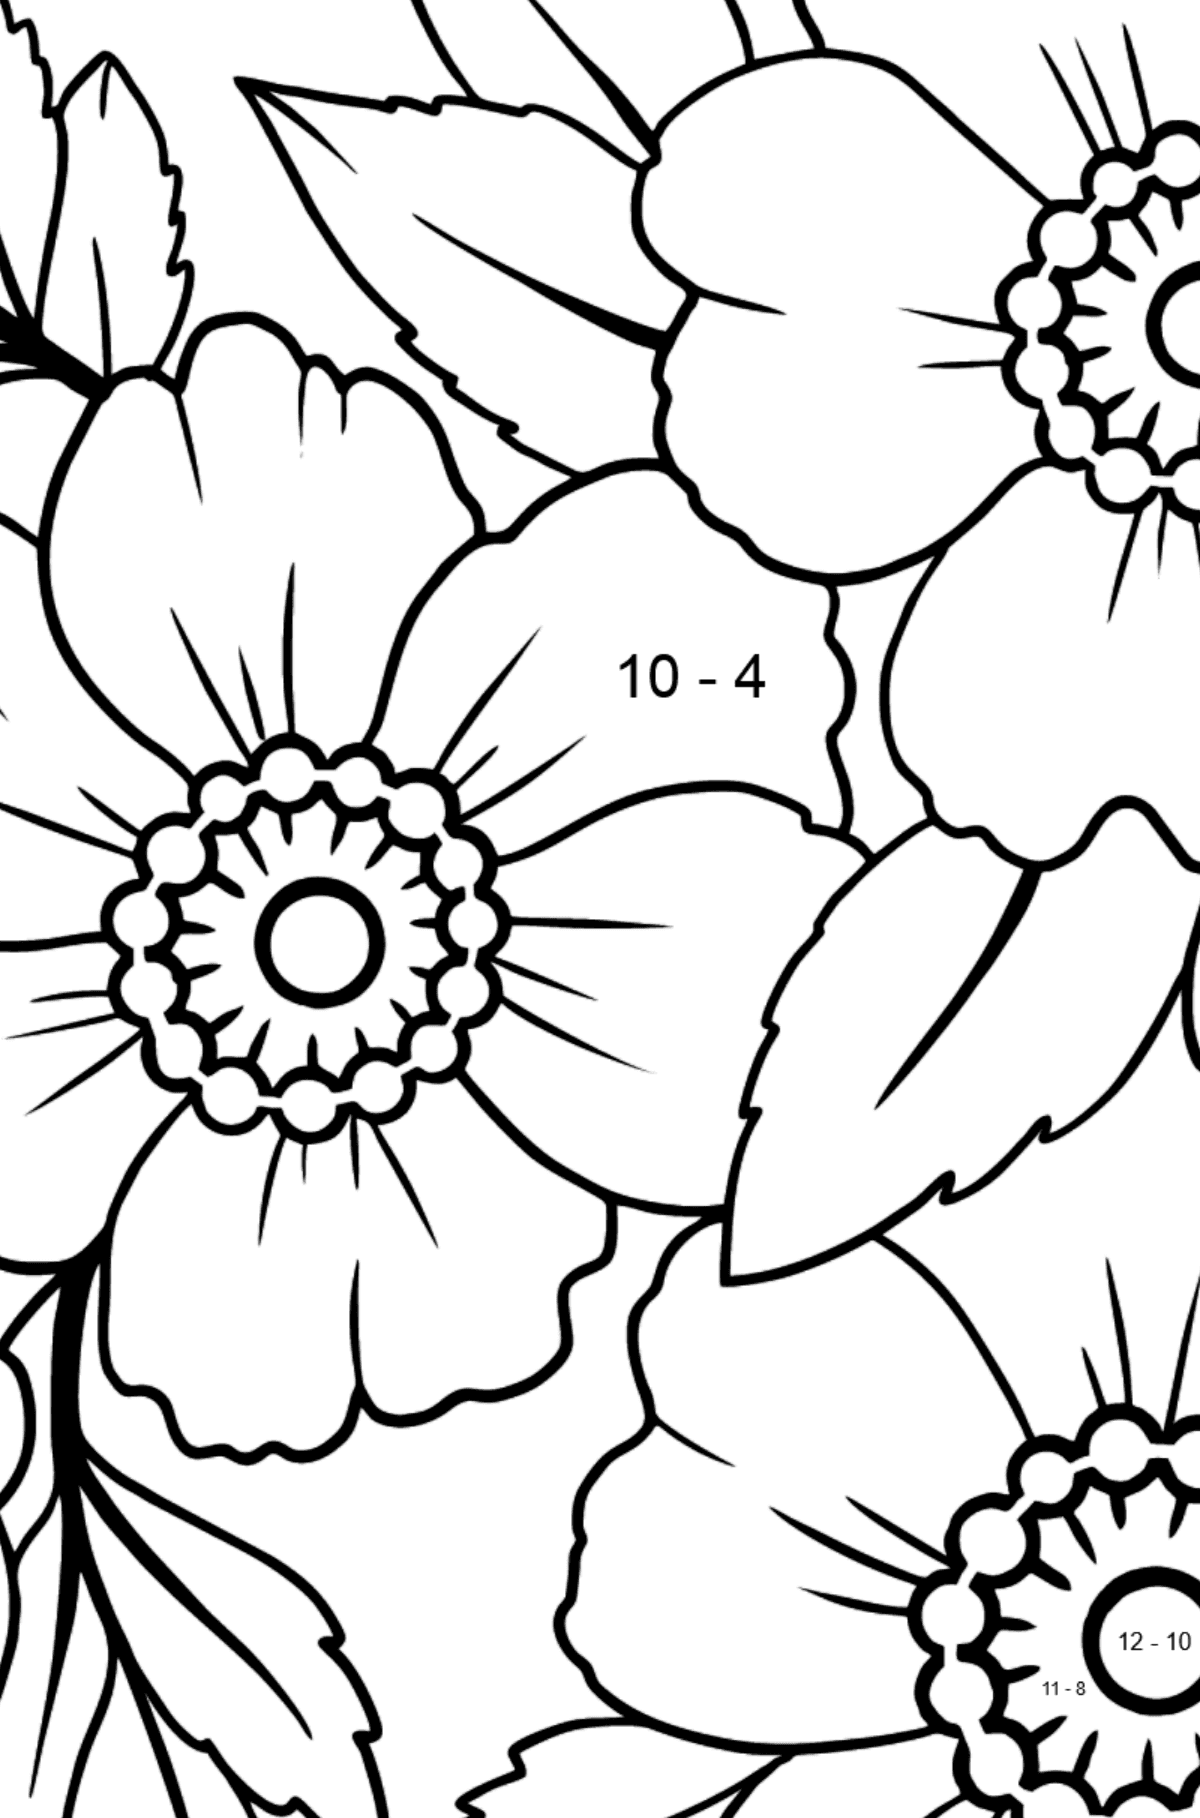 Flower Coloring Page - Japanese Velvet Anemone - Math Coloring - Subtraction for Kids